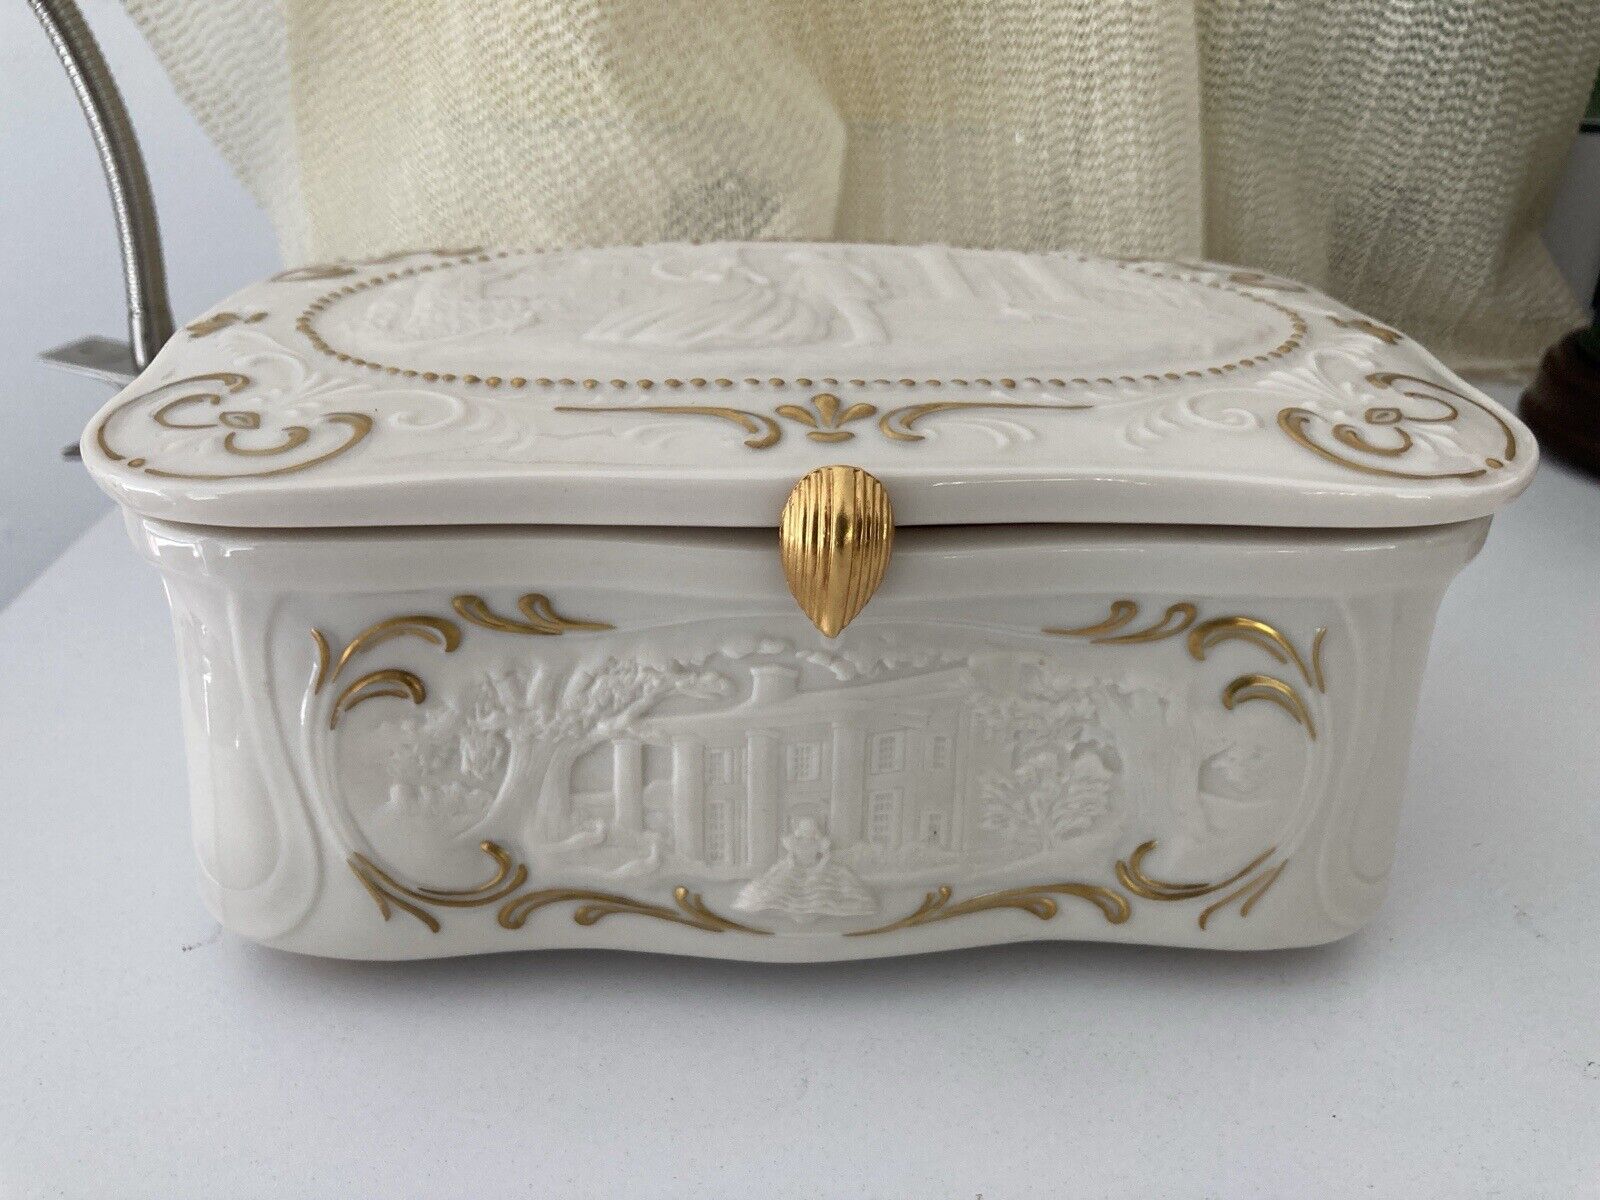 Franklin Mint Gone With The Wind Porcelain Jewelry Box with Tara's Theme Music